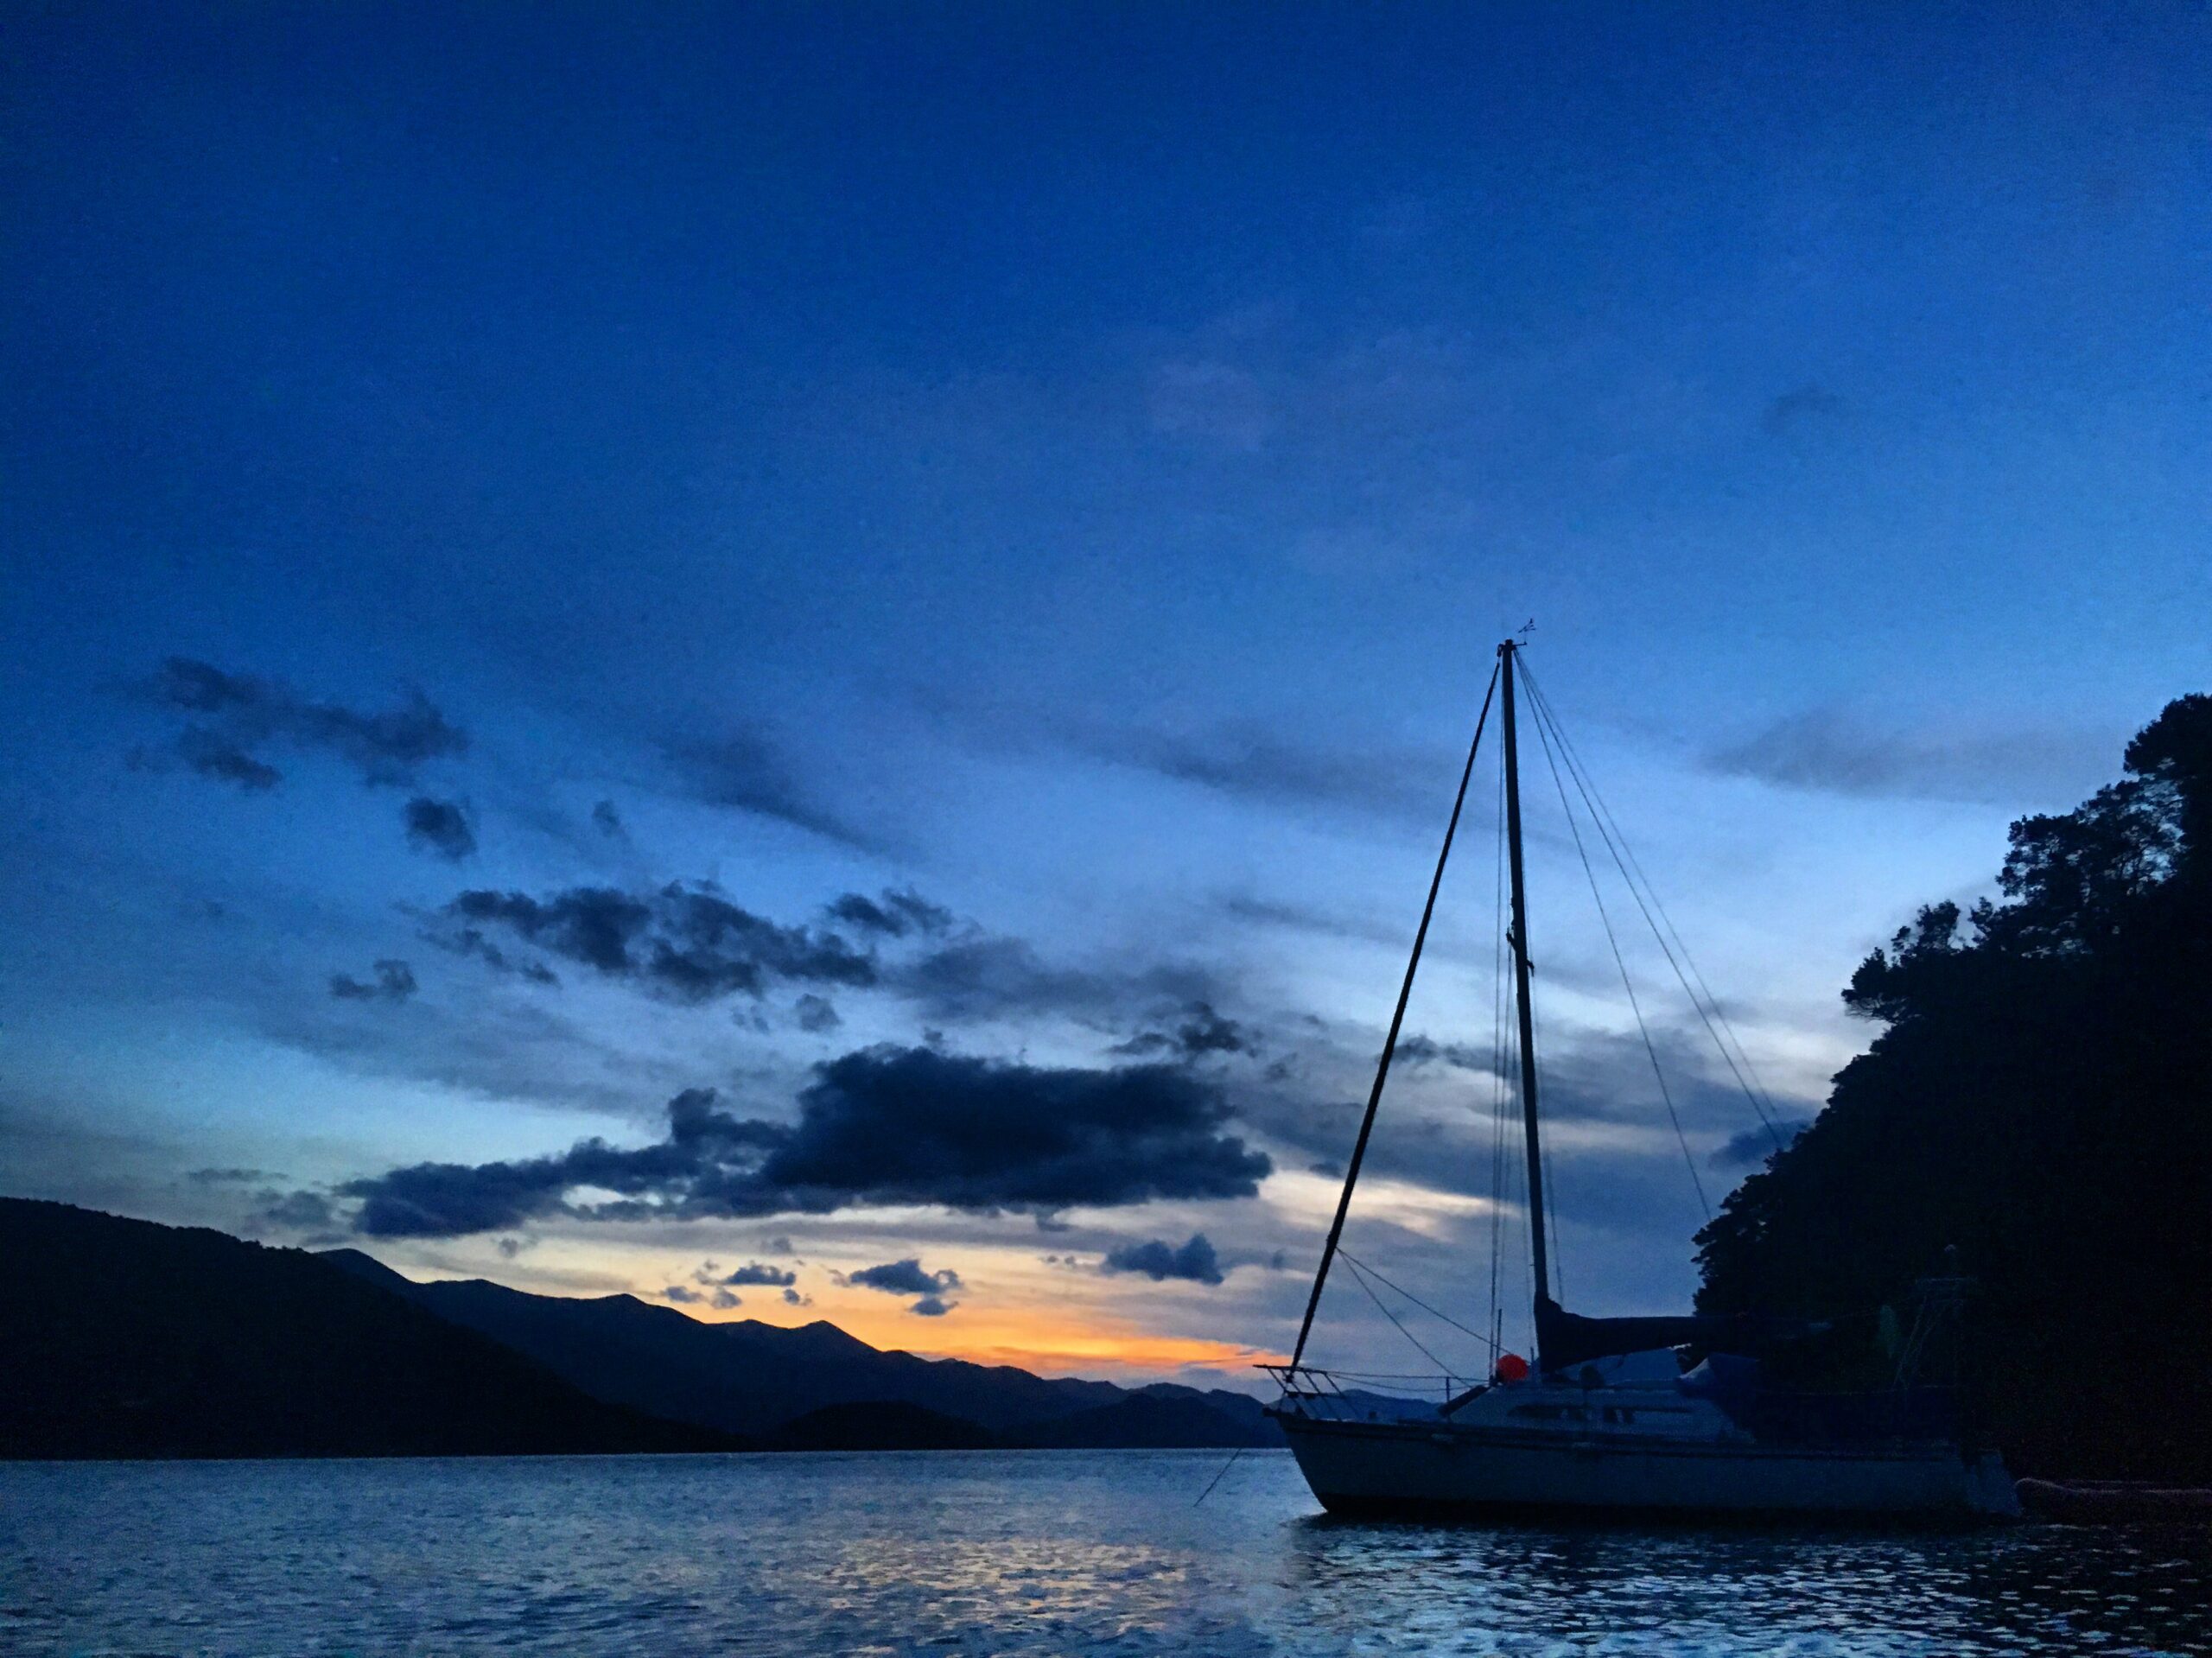 The sun sets over Kumutoto Bay in Queen Charlotte Sound, New Zealand.